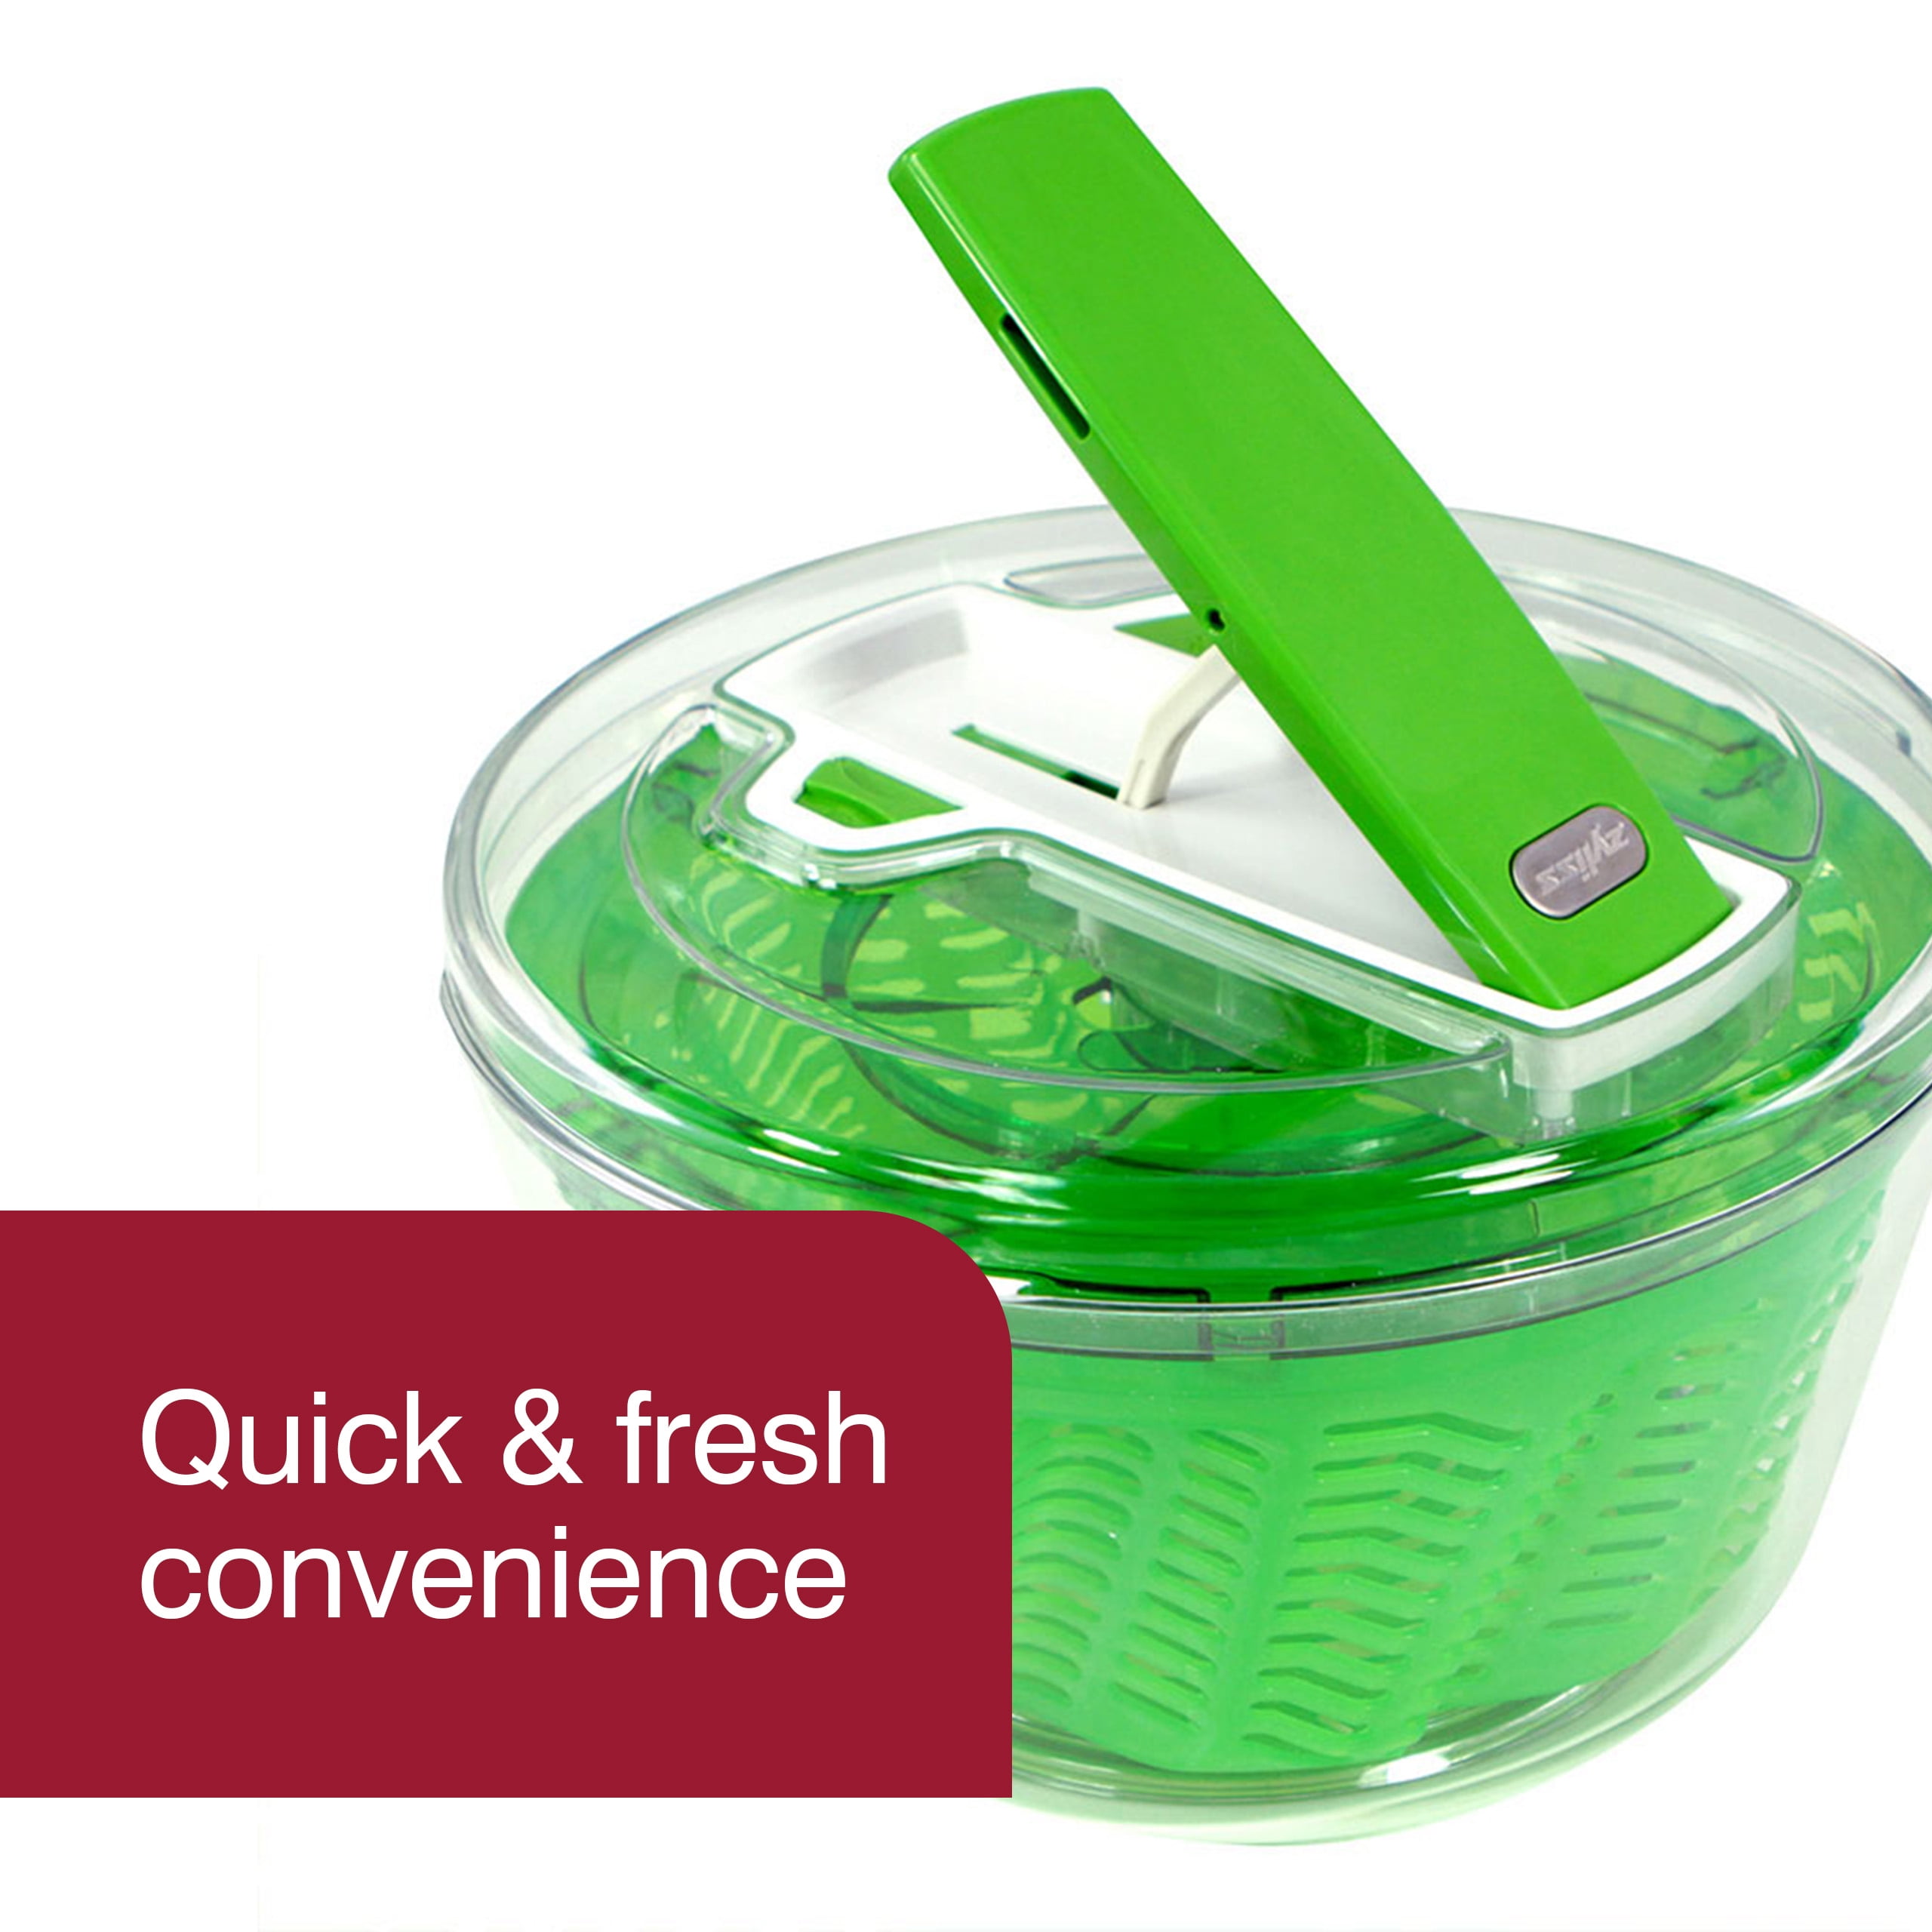 Green Easy & Pull Large Spinner Swift Serving Bowl, Large Salad with Handle Dry Zyliss